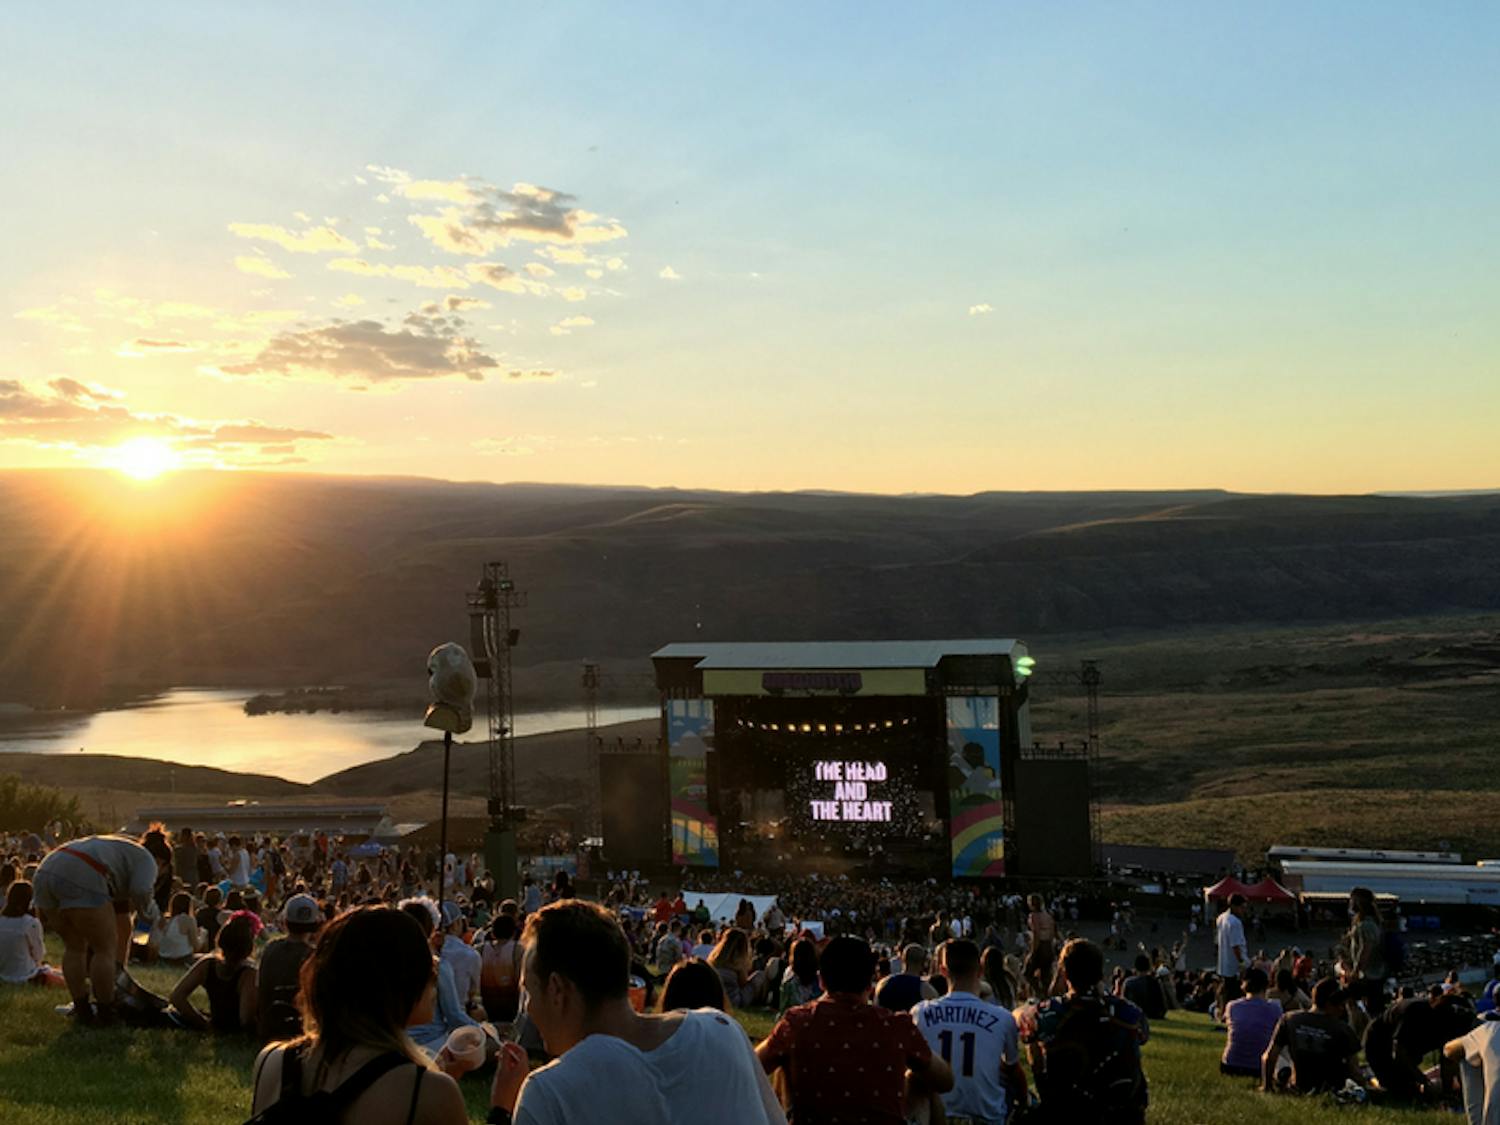 A crowd gathers as the sun sets over the Gorge Amphitheater. The three-day&nbsp;Sasquatch Music Festival&nbsp;takes place annually in George, Washington on Memorial Day weekend.&nbsp;